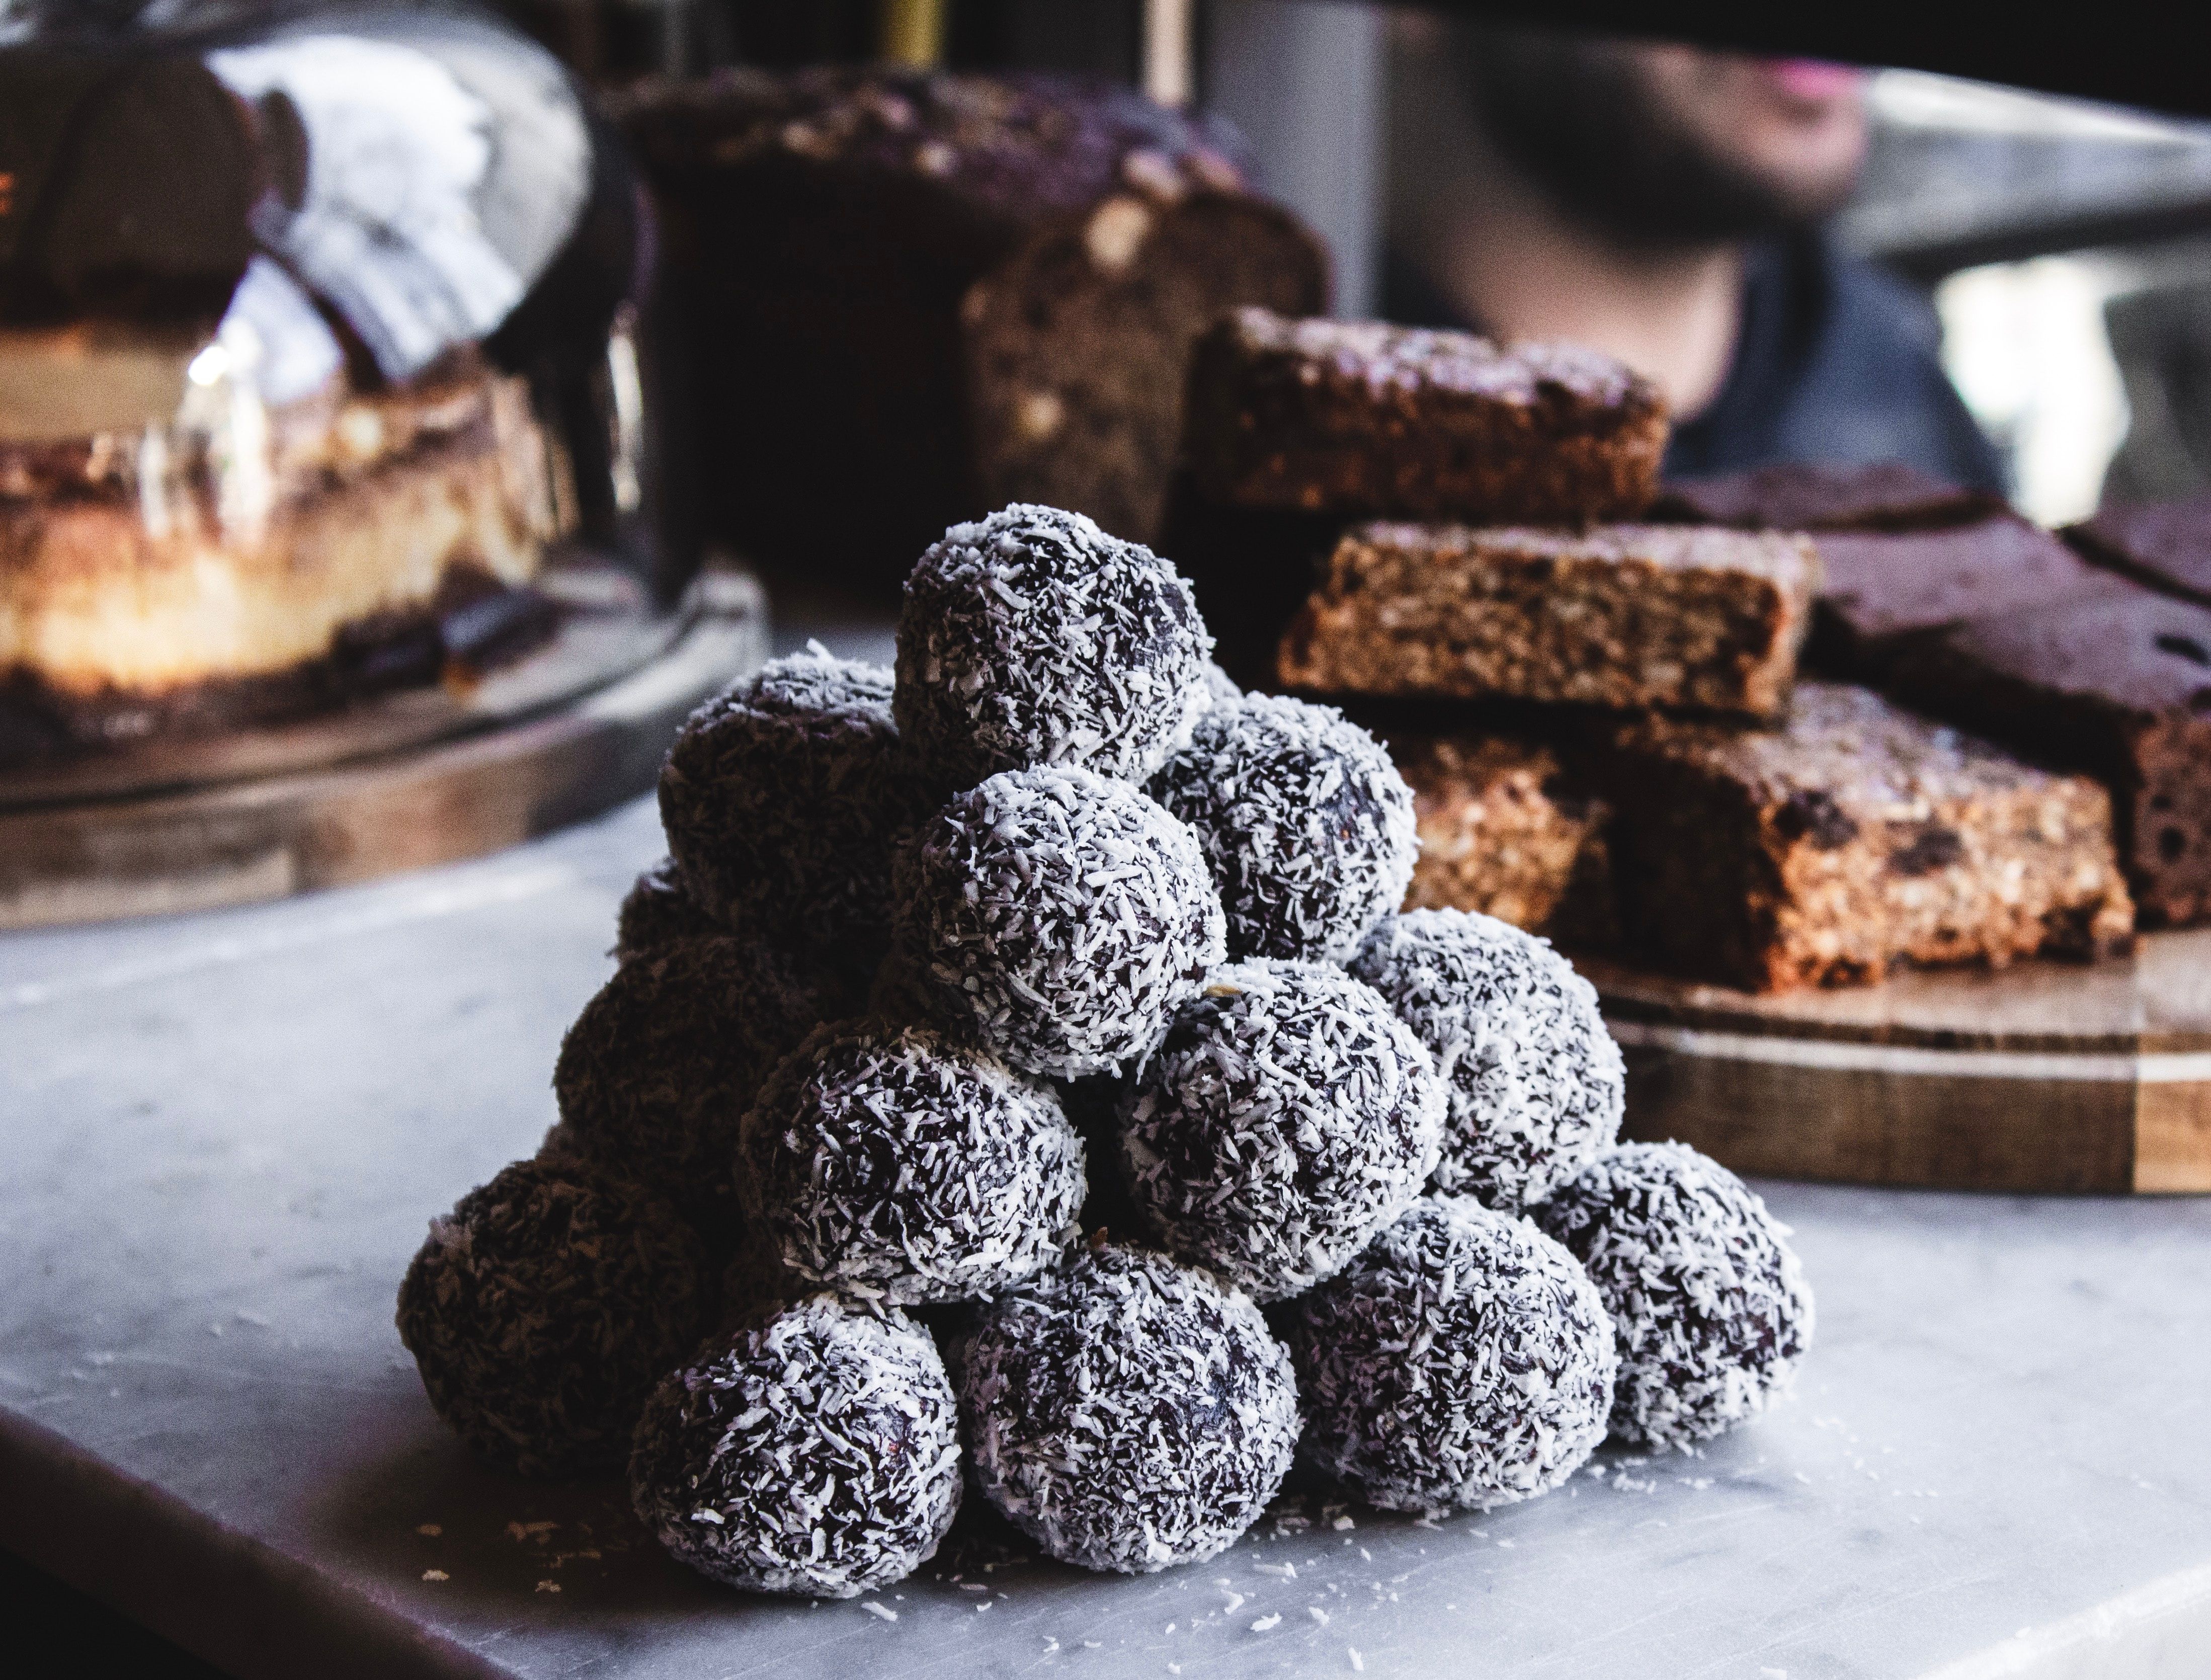 A stacked pile of Queen Garnet plum rum balls on a bench, with other various desserts sitting in the background